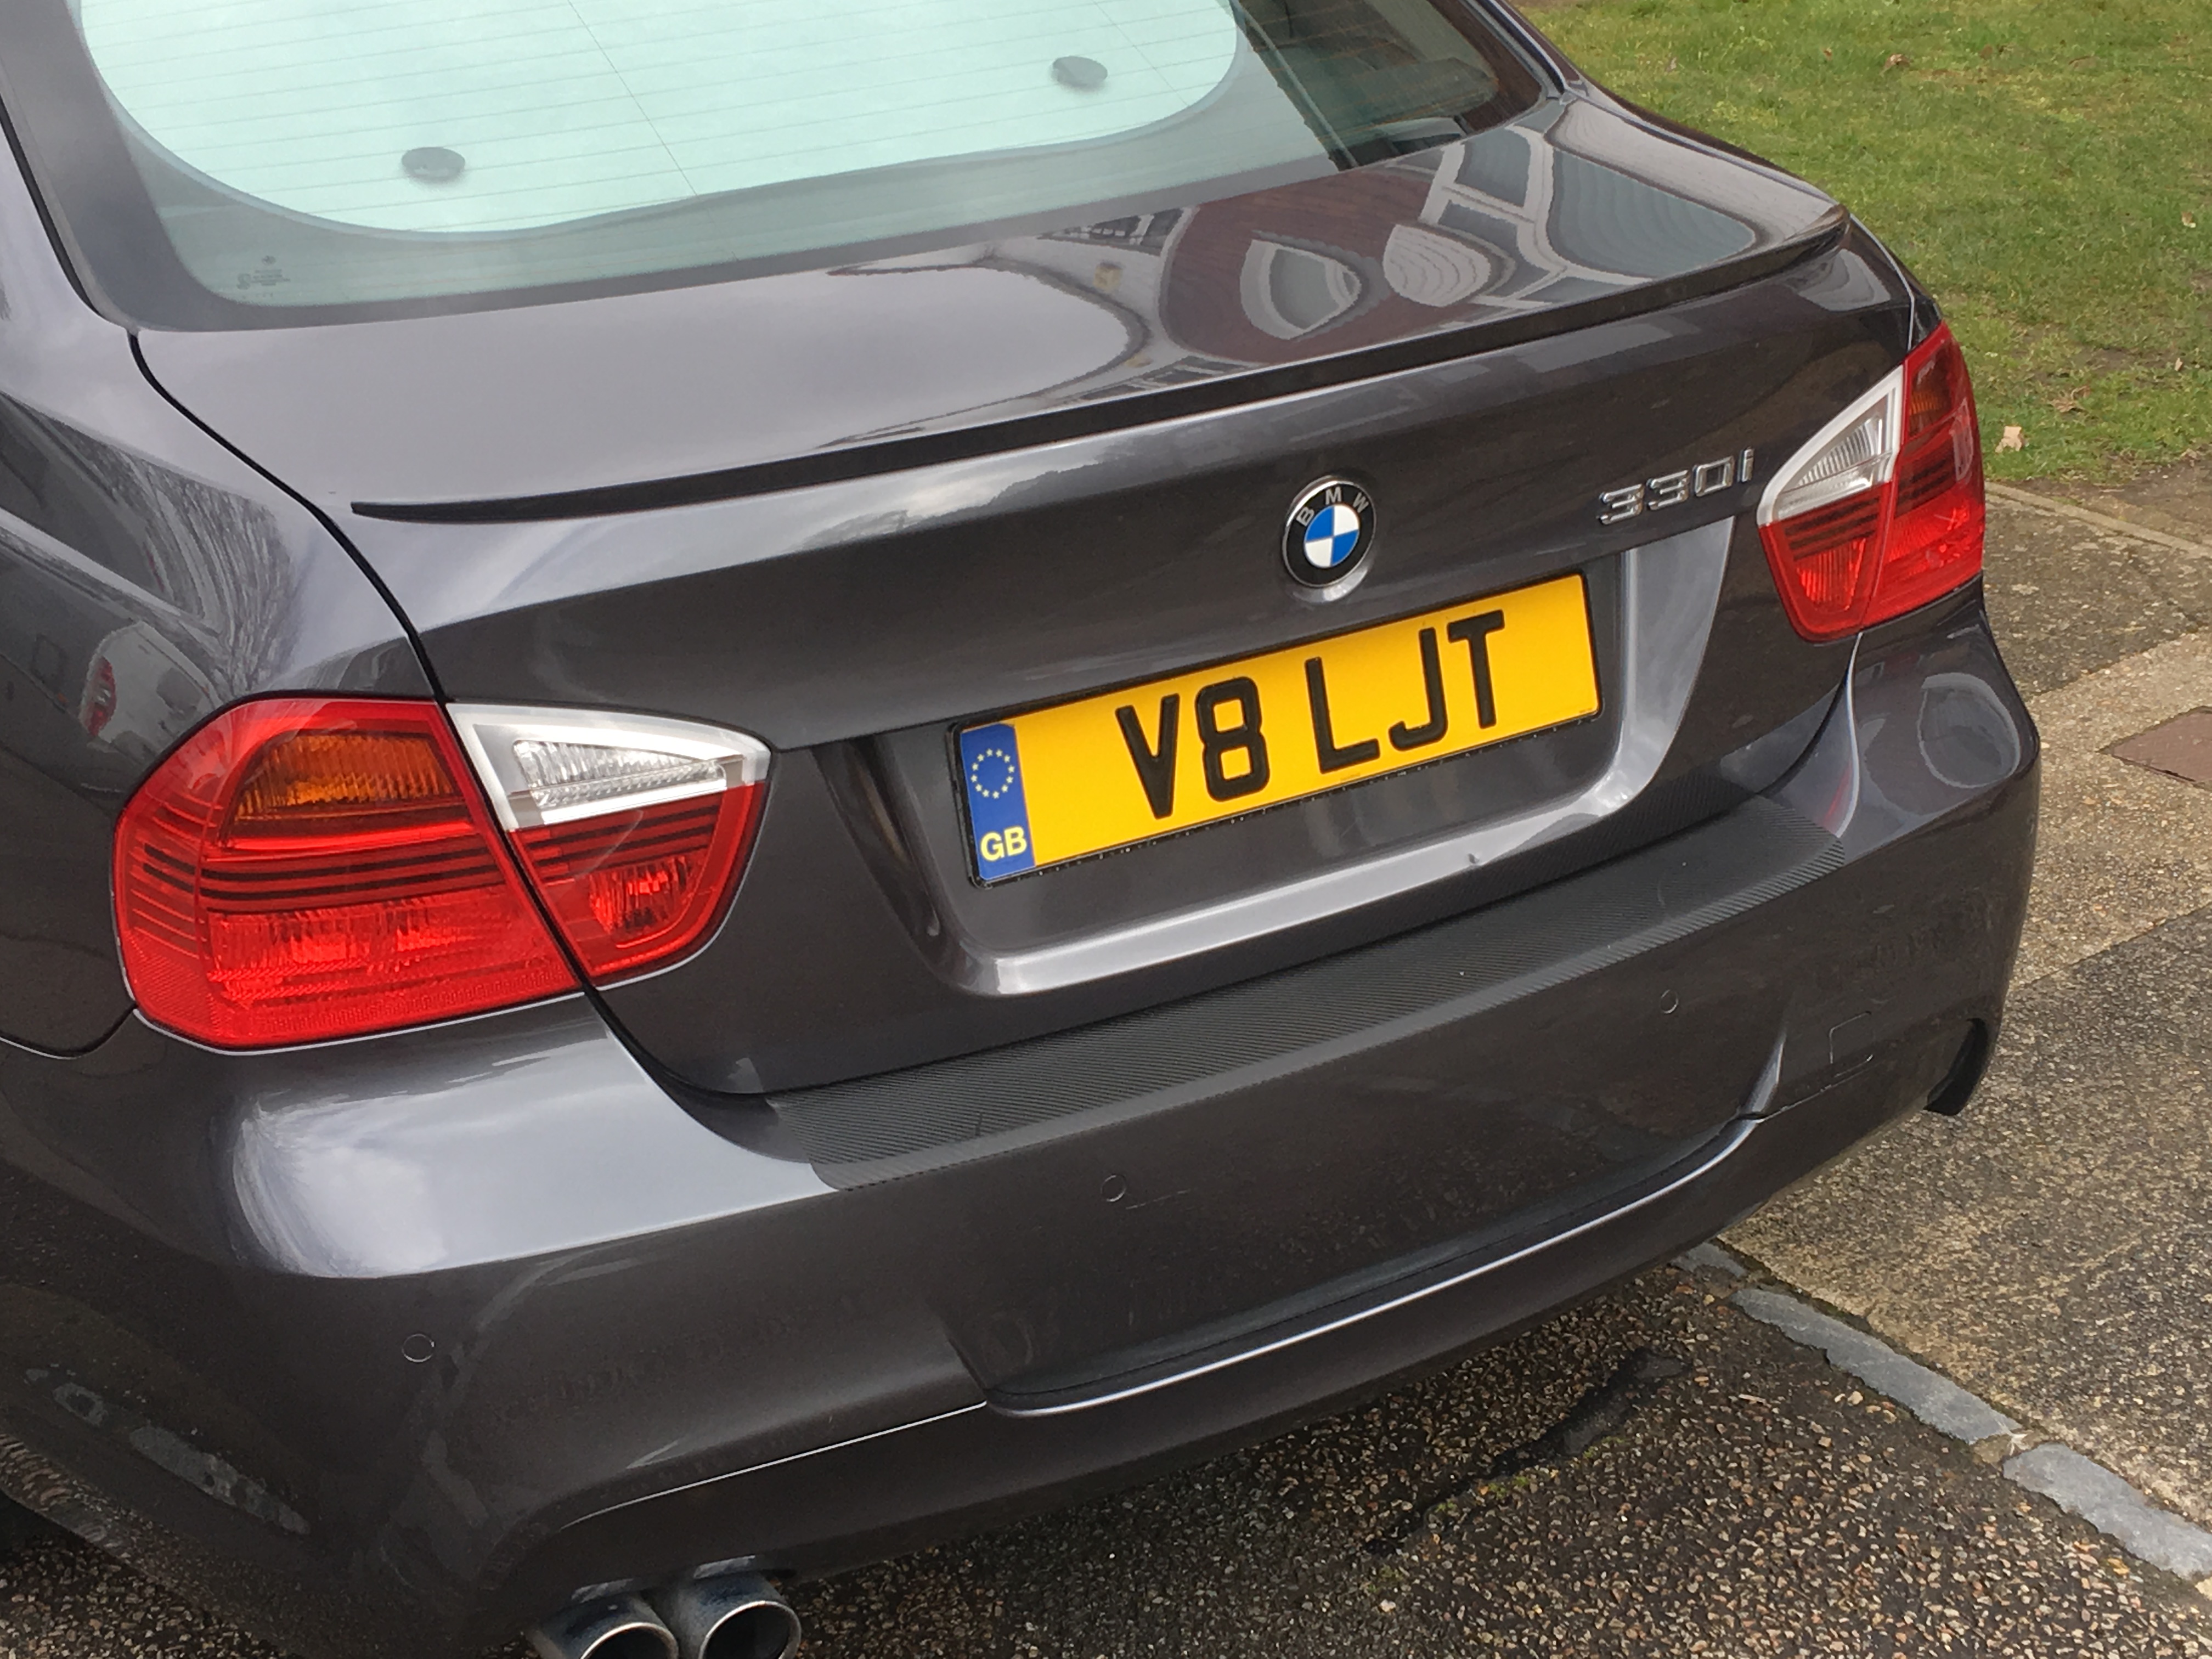 Show us your REAR END! - Page 247 - Readers' Cars - PistonHeads